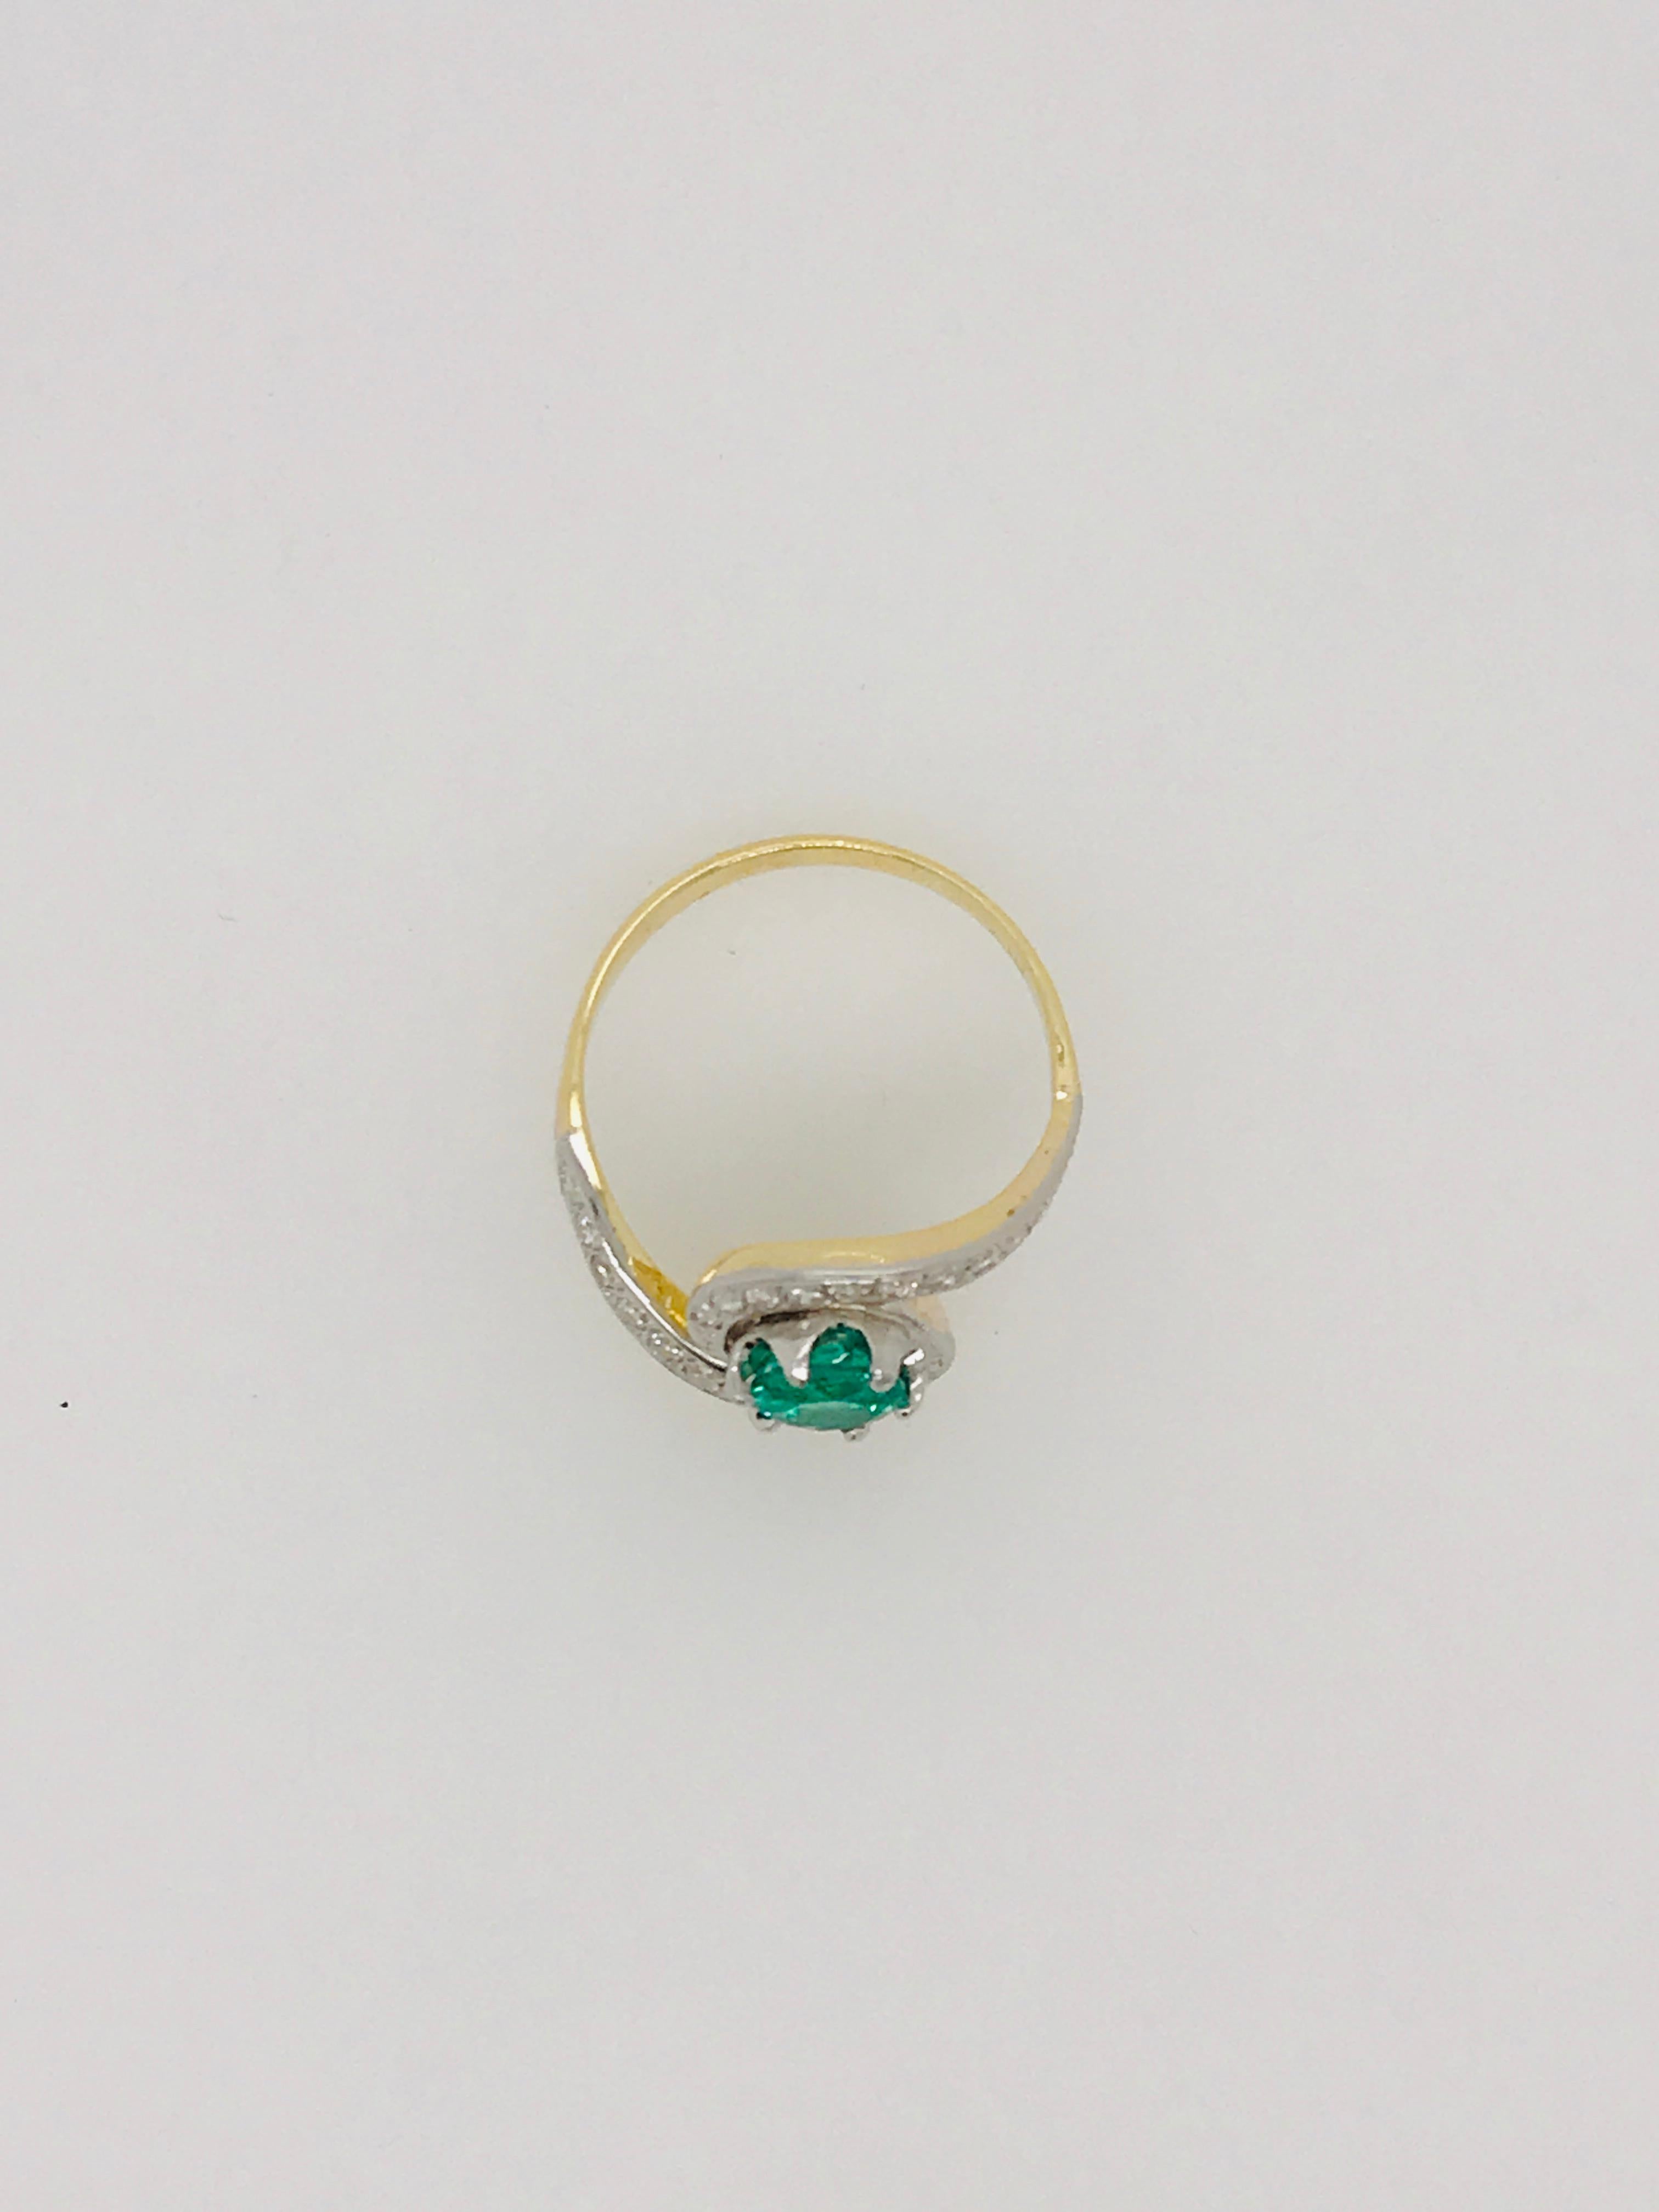 Contemporary Round Emerald and Grain Set Diamond Ring Set in 18ct White Gold and Yellow Gold